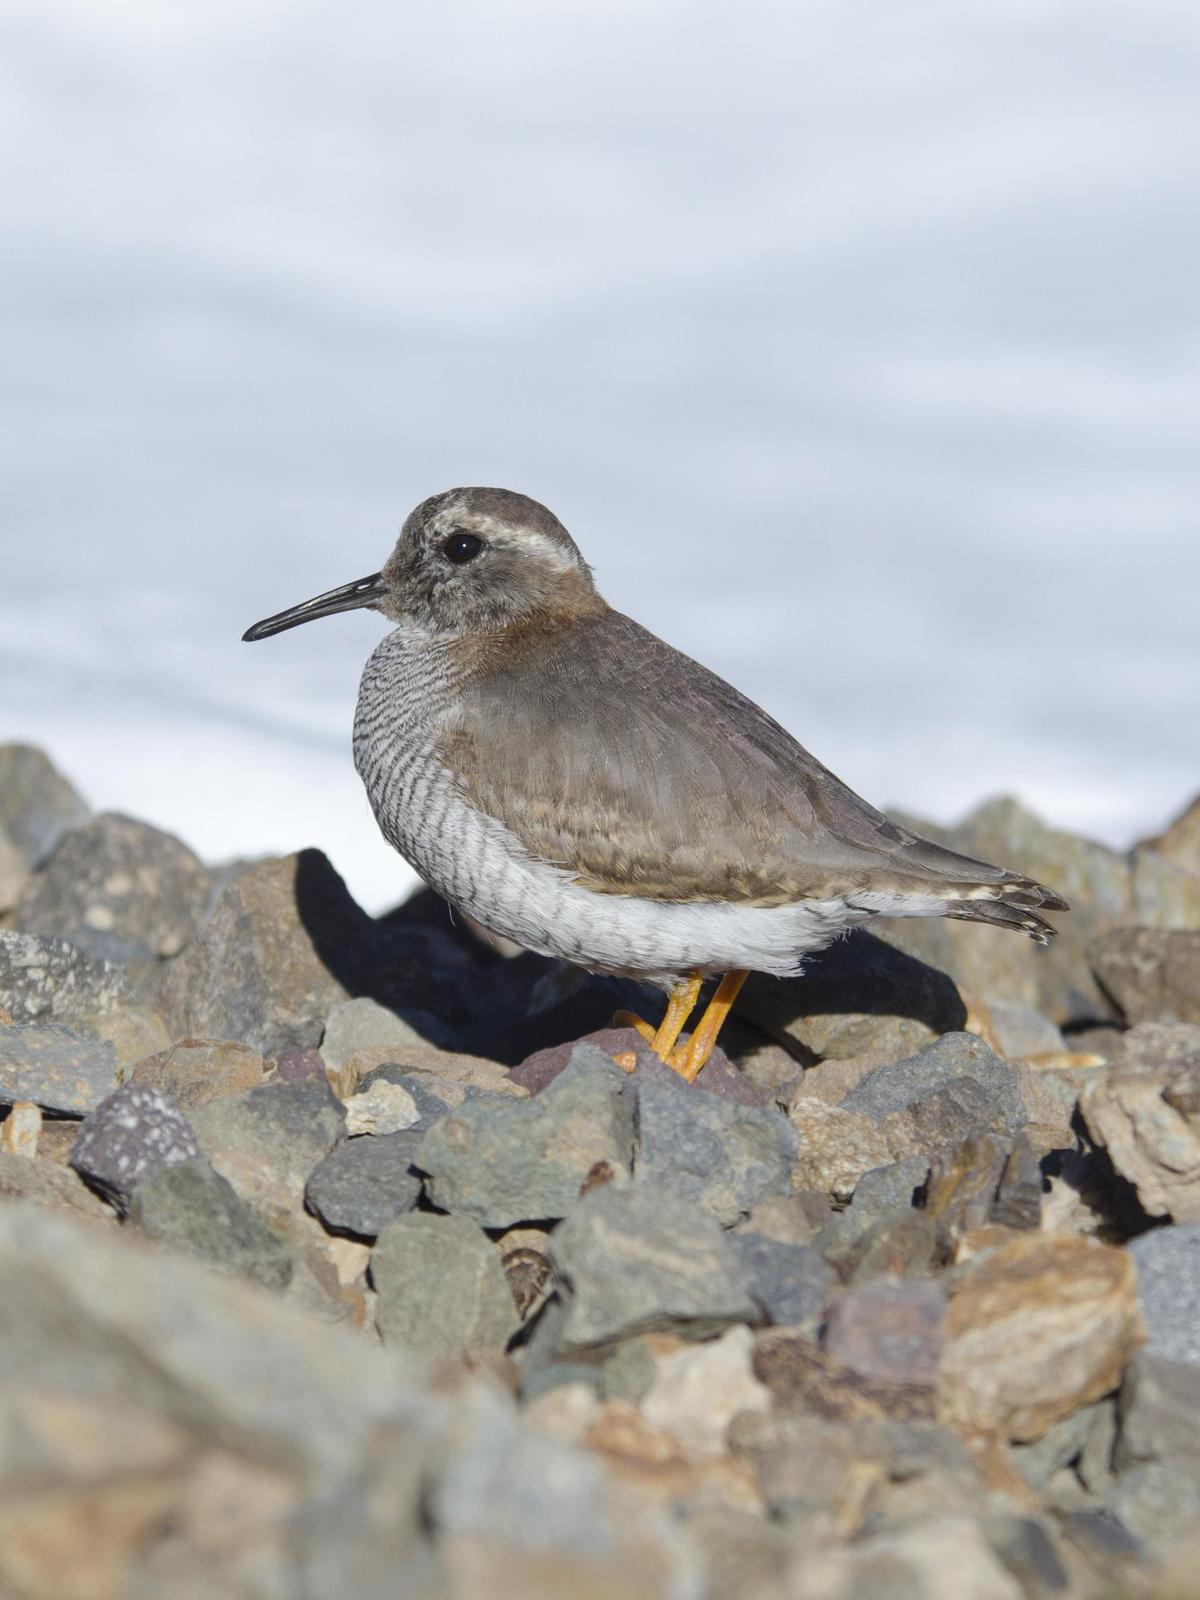 Diademed Sandpiper-Plover Photo by Cristian  Pinto